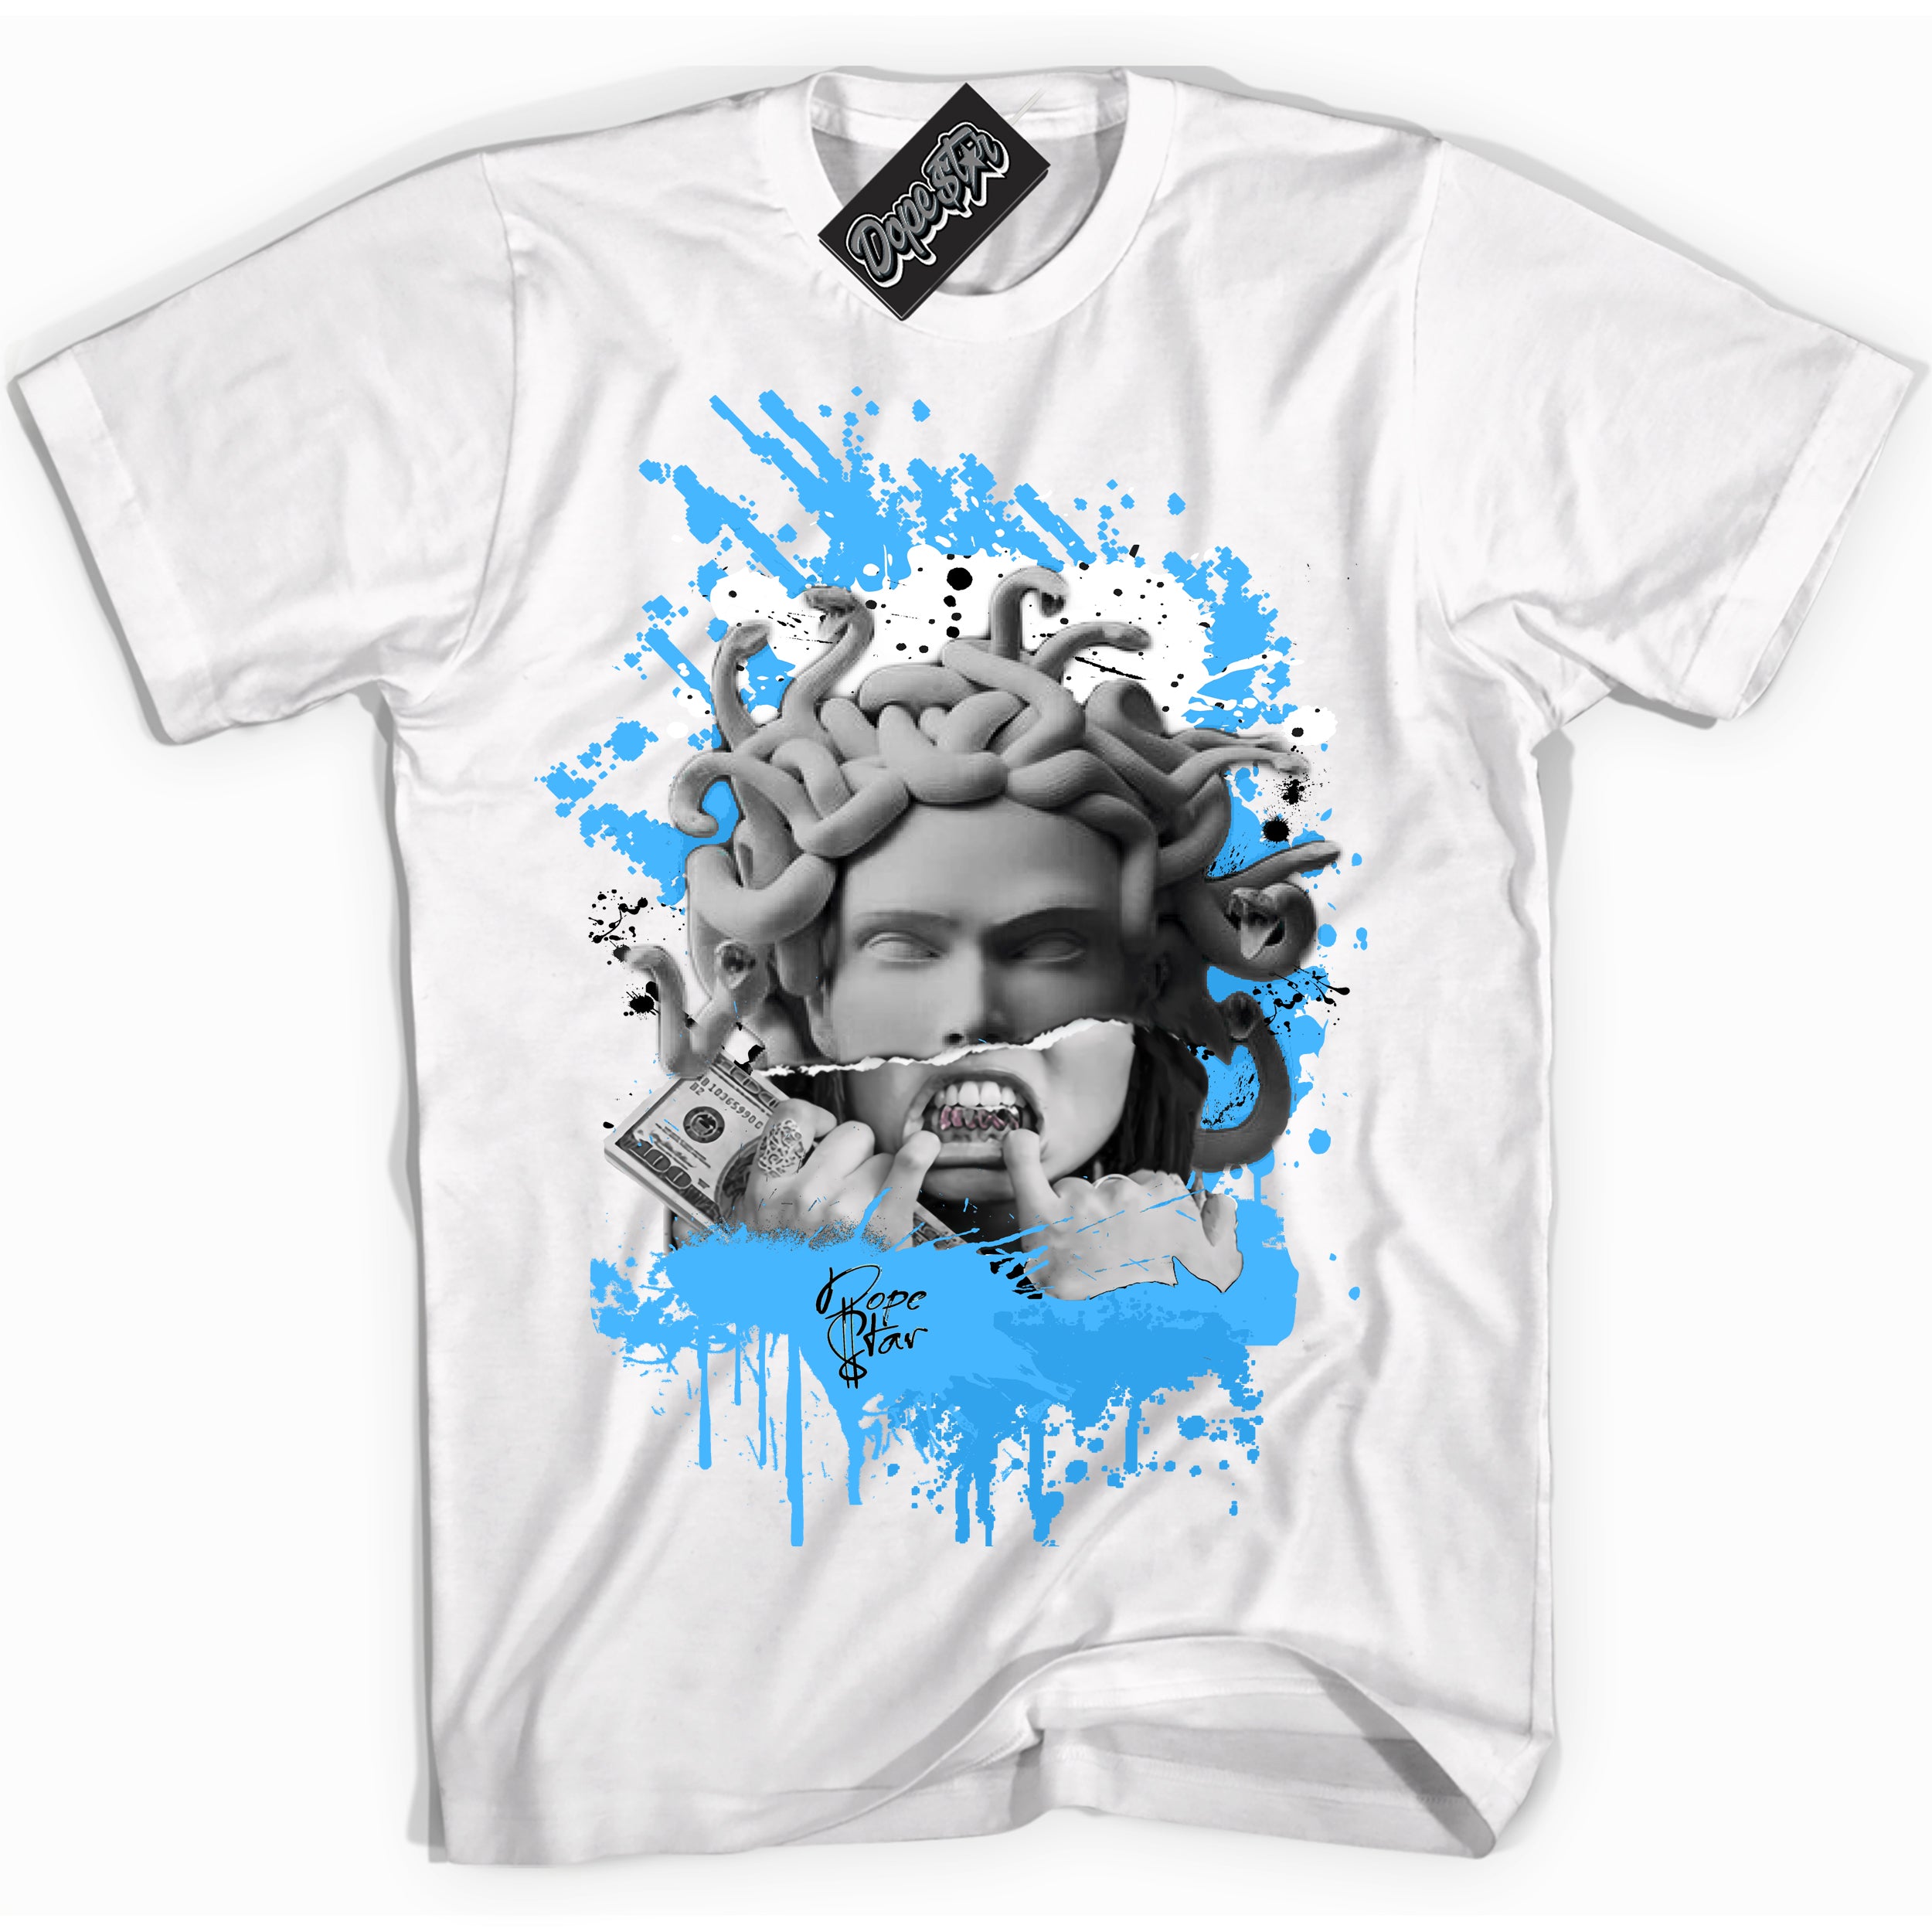 Cool White graphic tee with “ Medusa ” design, that perfectly matches Powder Blue 9s sneakers 